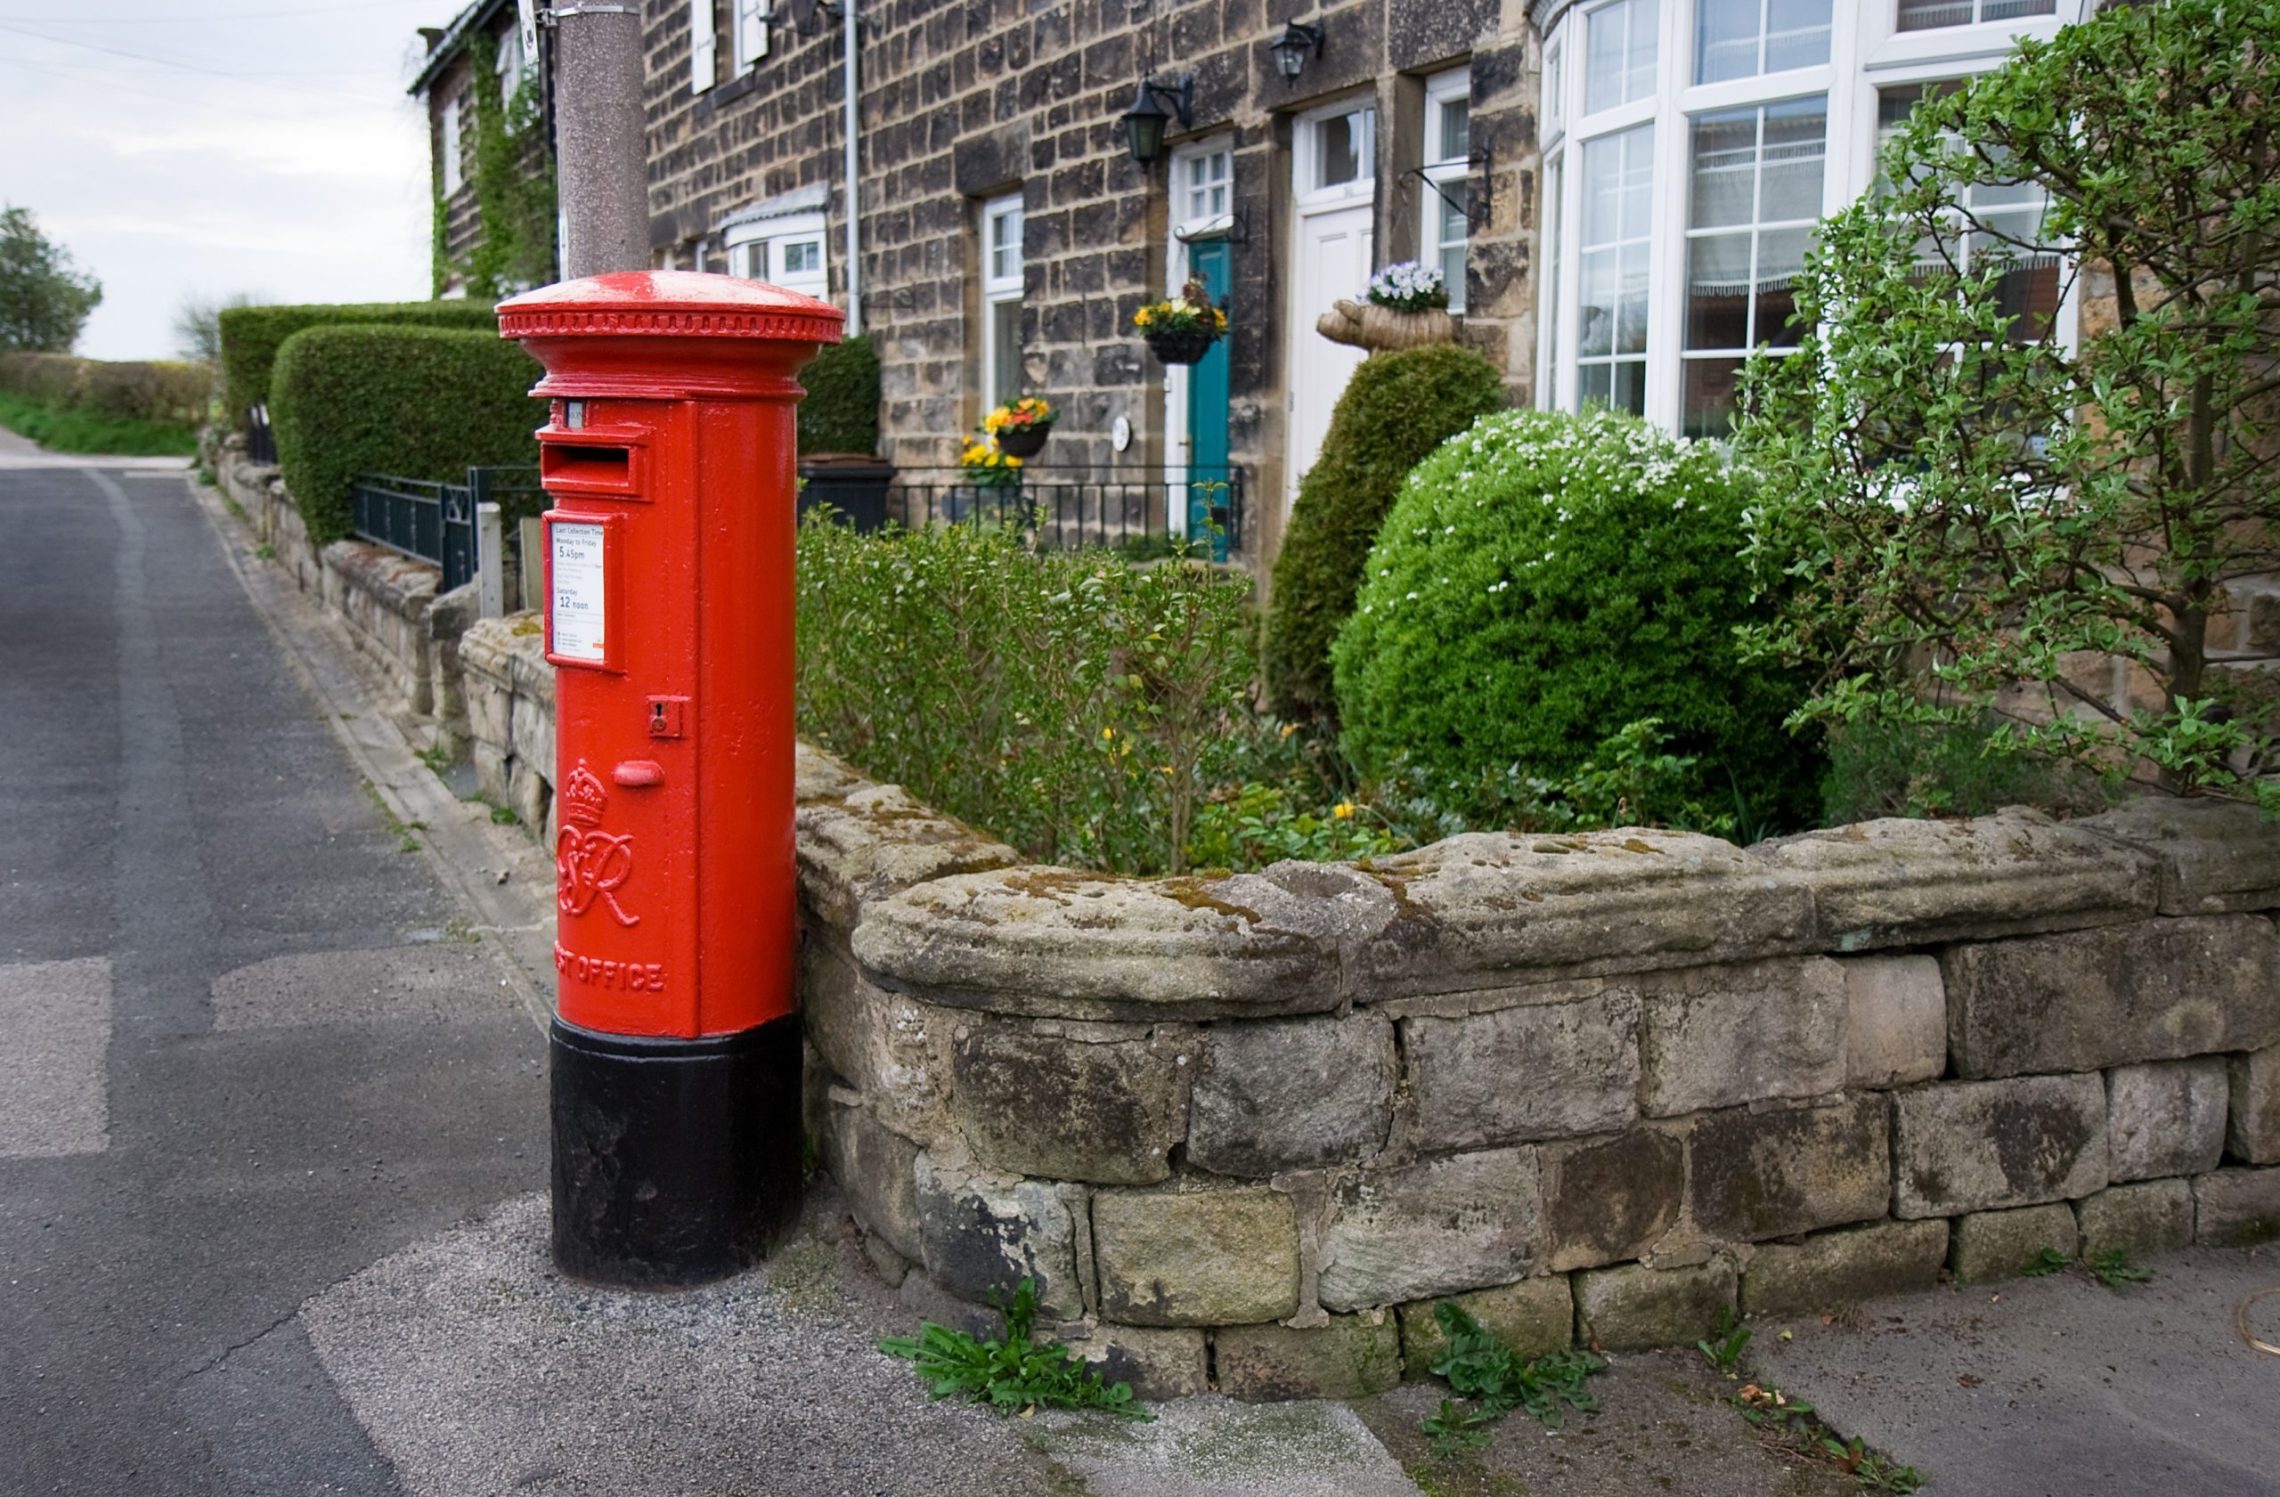 How to Maintain your Letterbox | Maintain a Letterbox | Maintain Letterbox